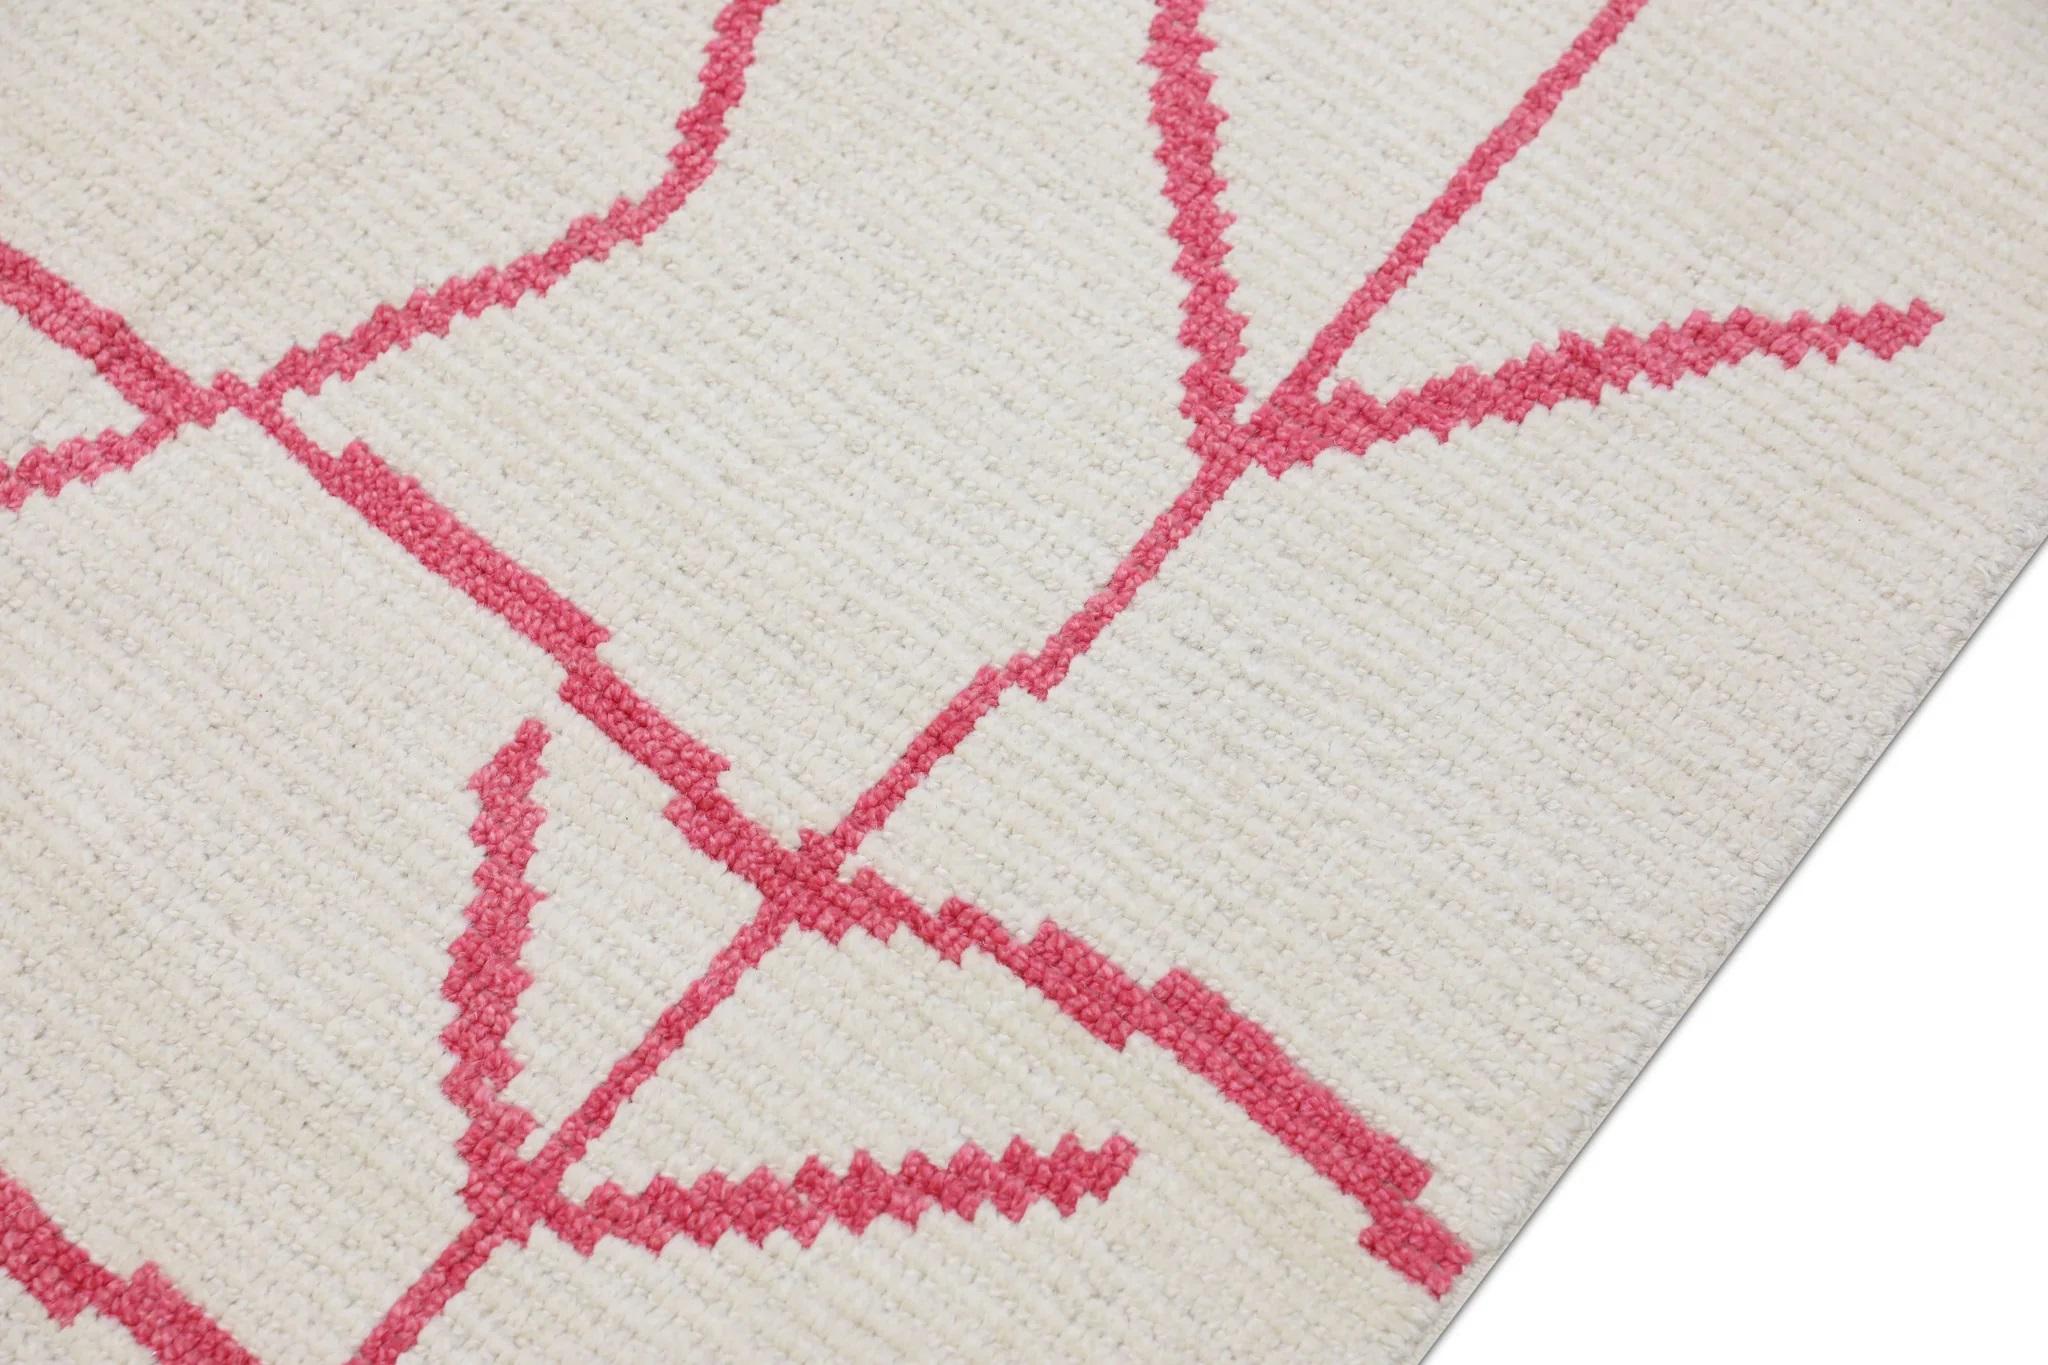 Hand-Woven Pink & White 21st Century Modern Moroccan Style Wool Rug 9'3